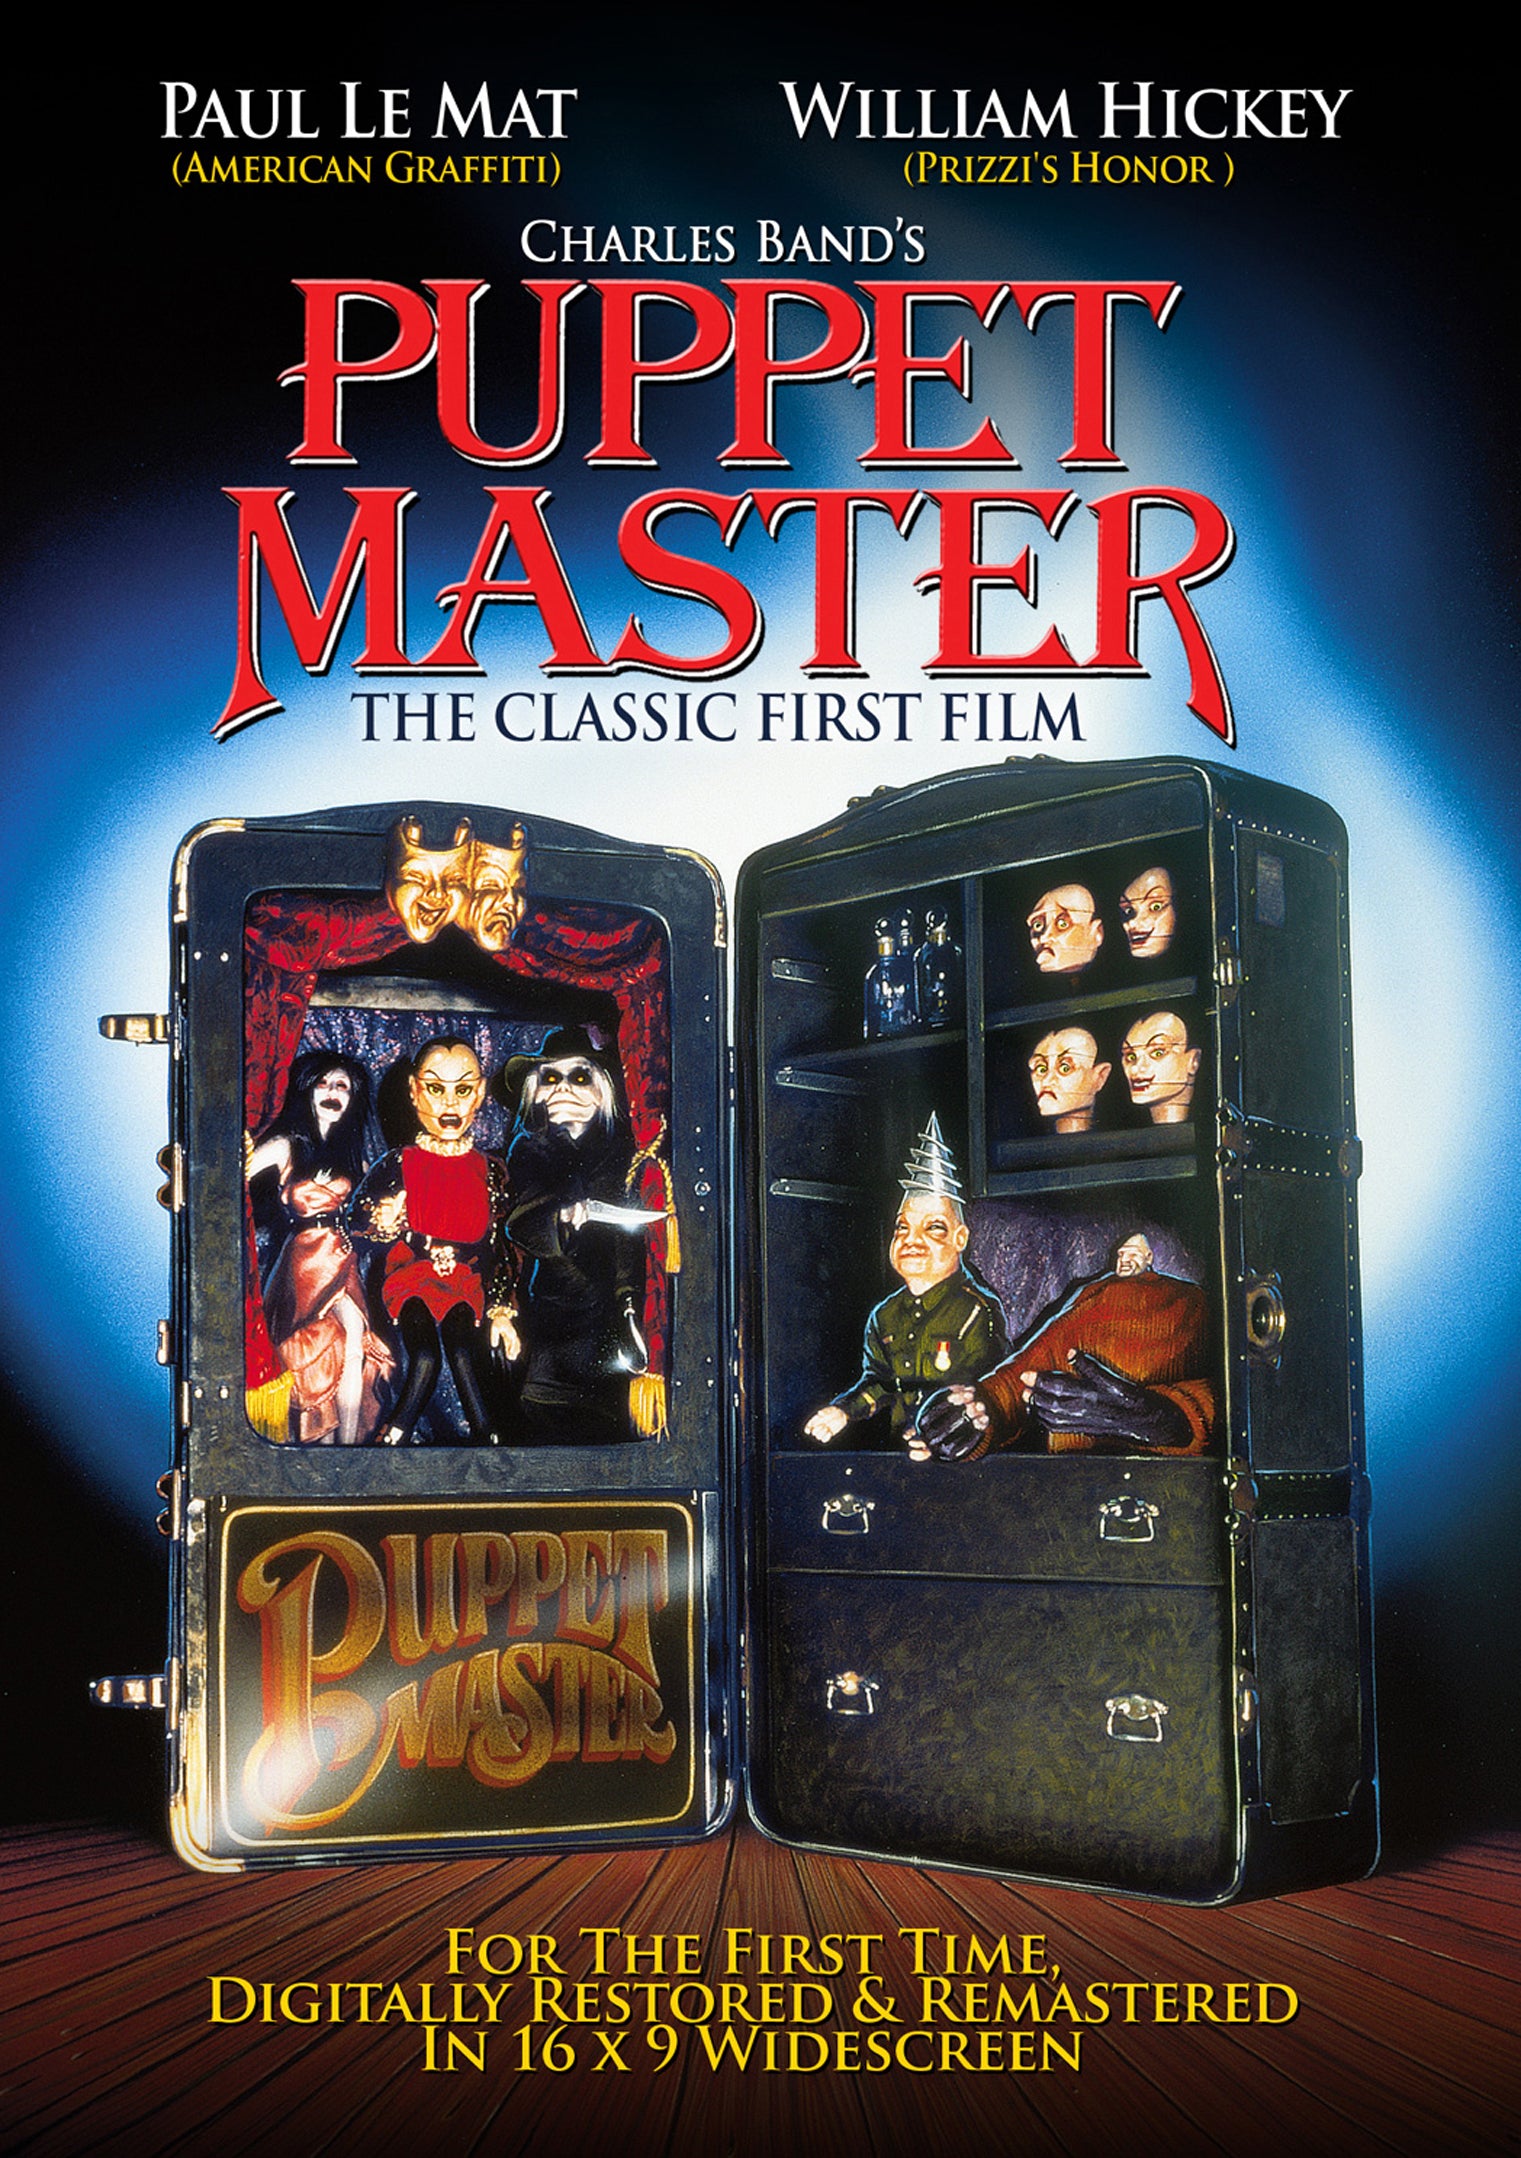 PUPPET MASTER: THE LEGACY BLU-RAY